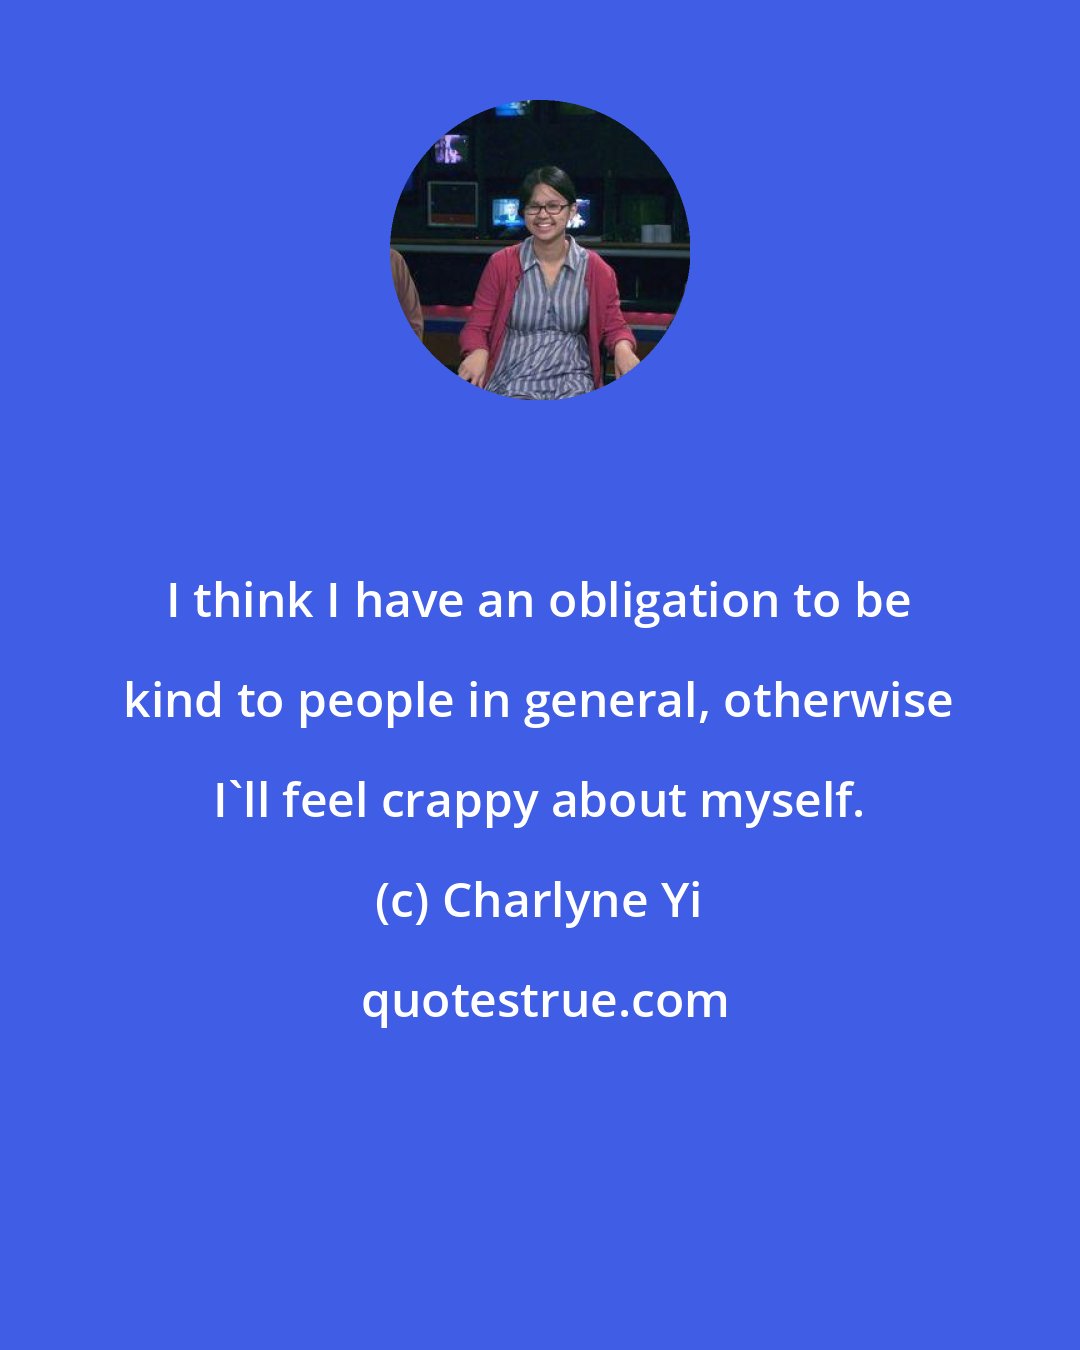 Charlyne Yi: I think I have an obligation to be kind to people in general, otherwise I'll feel crappy about myself.